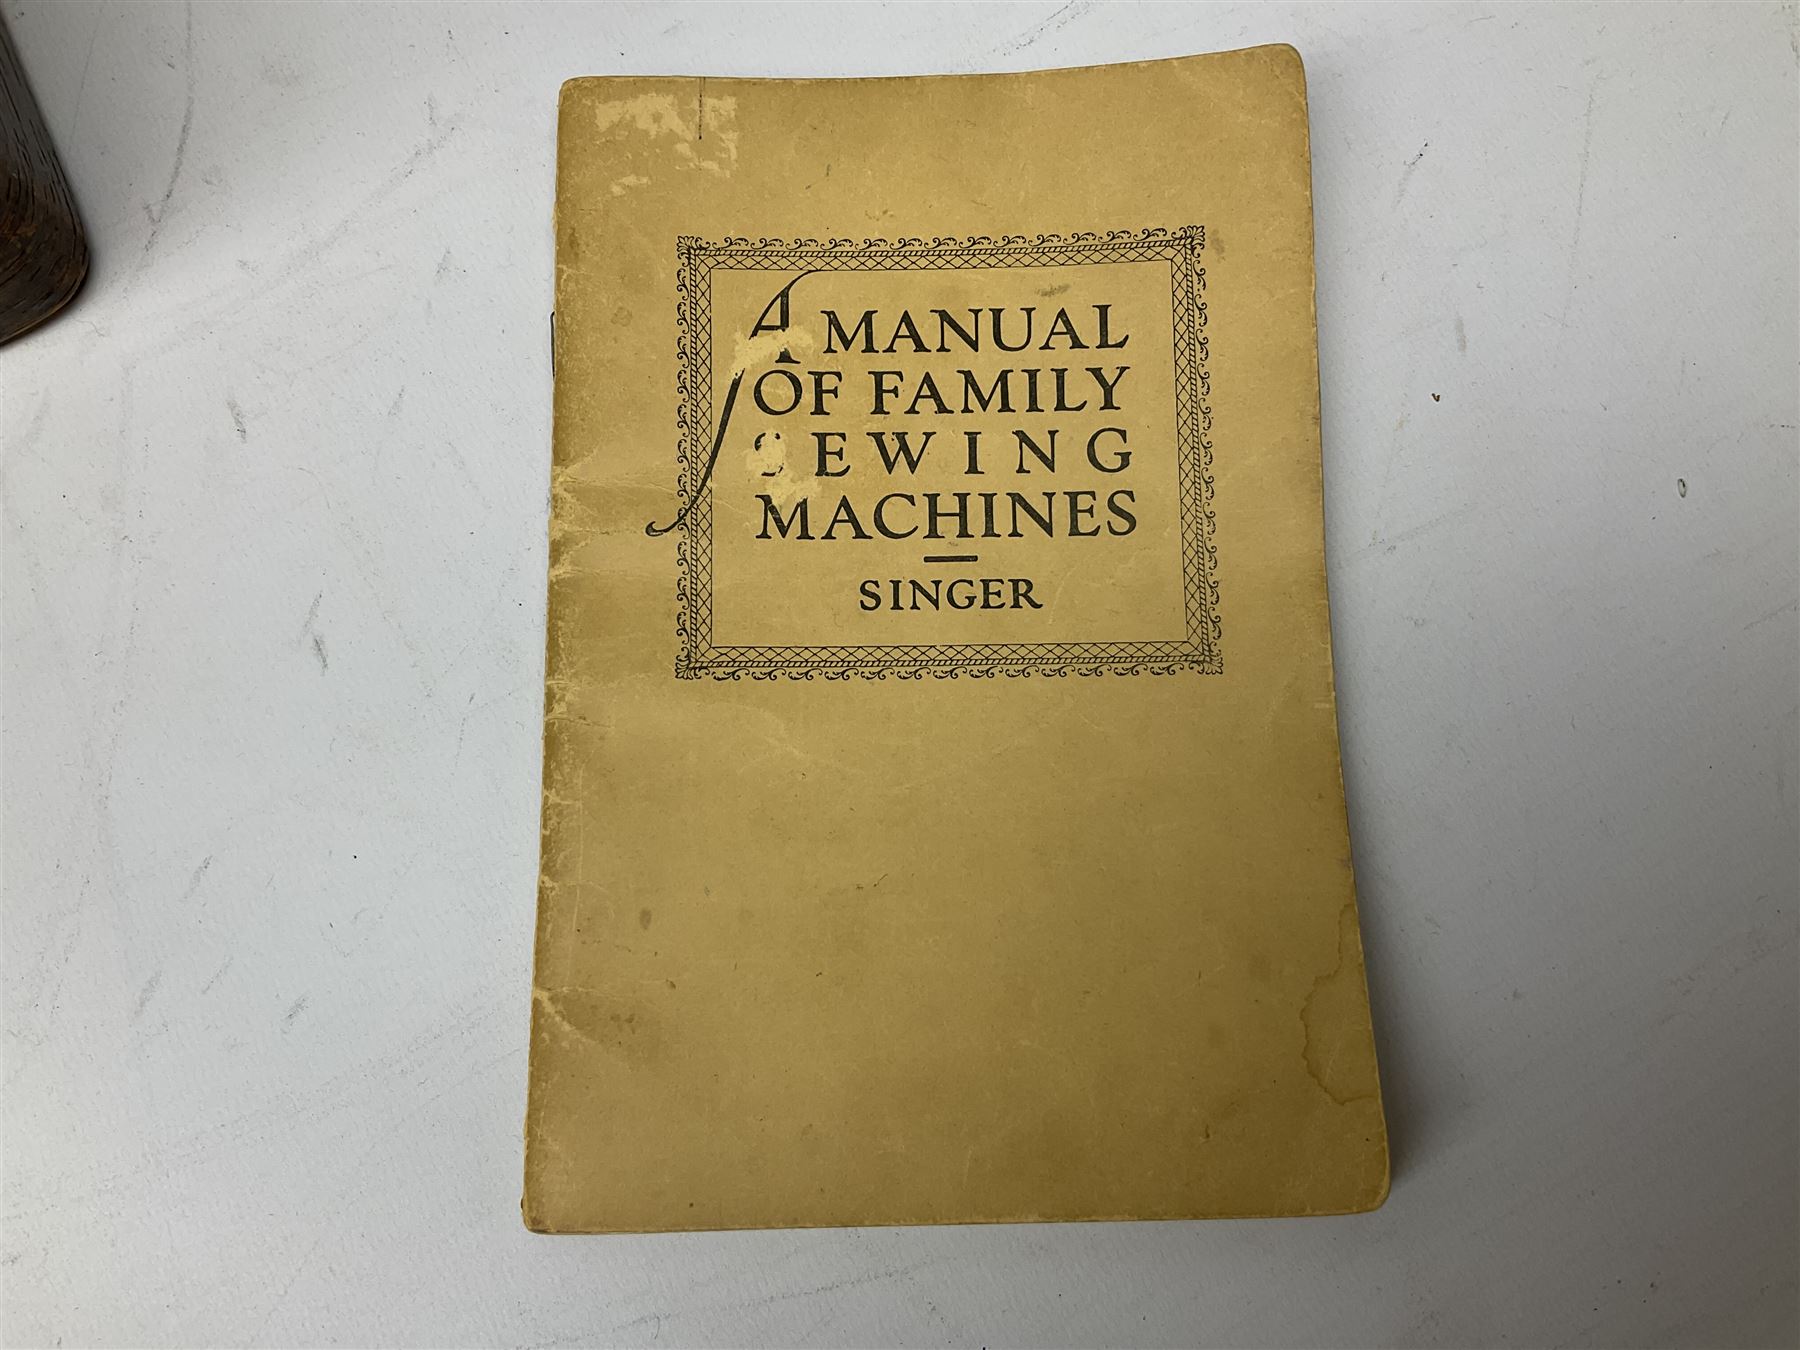 Singer sewing machine no. EA584046 in case (missing key) and Singer Manual of Family Sewing Machines - Image 8 of 10